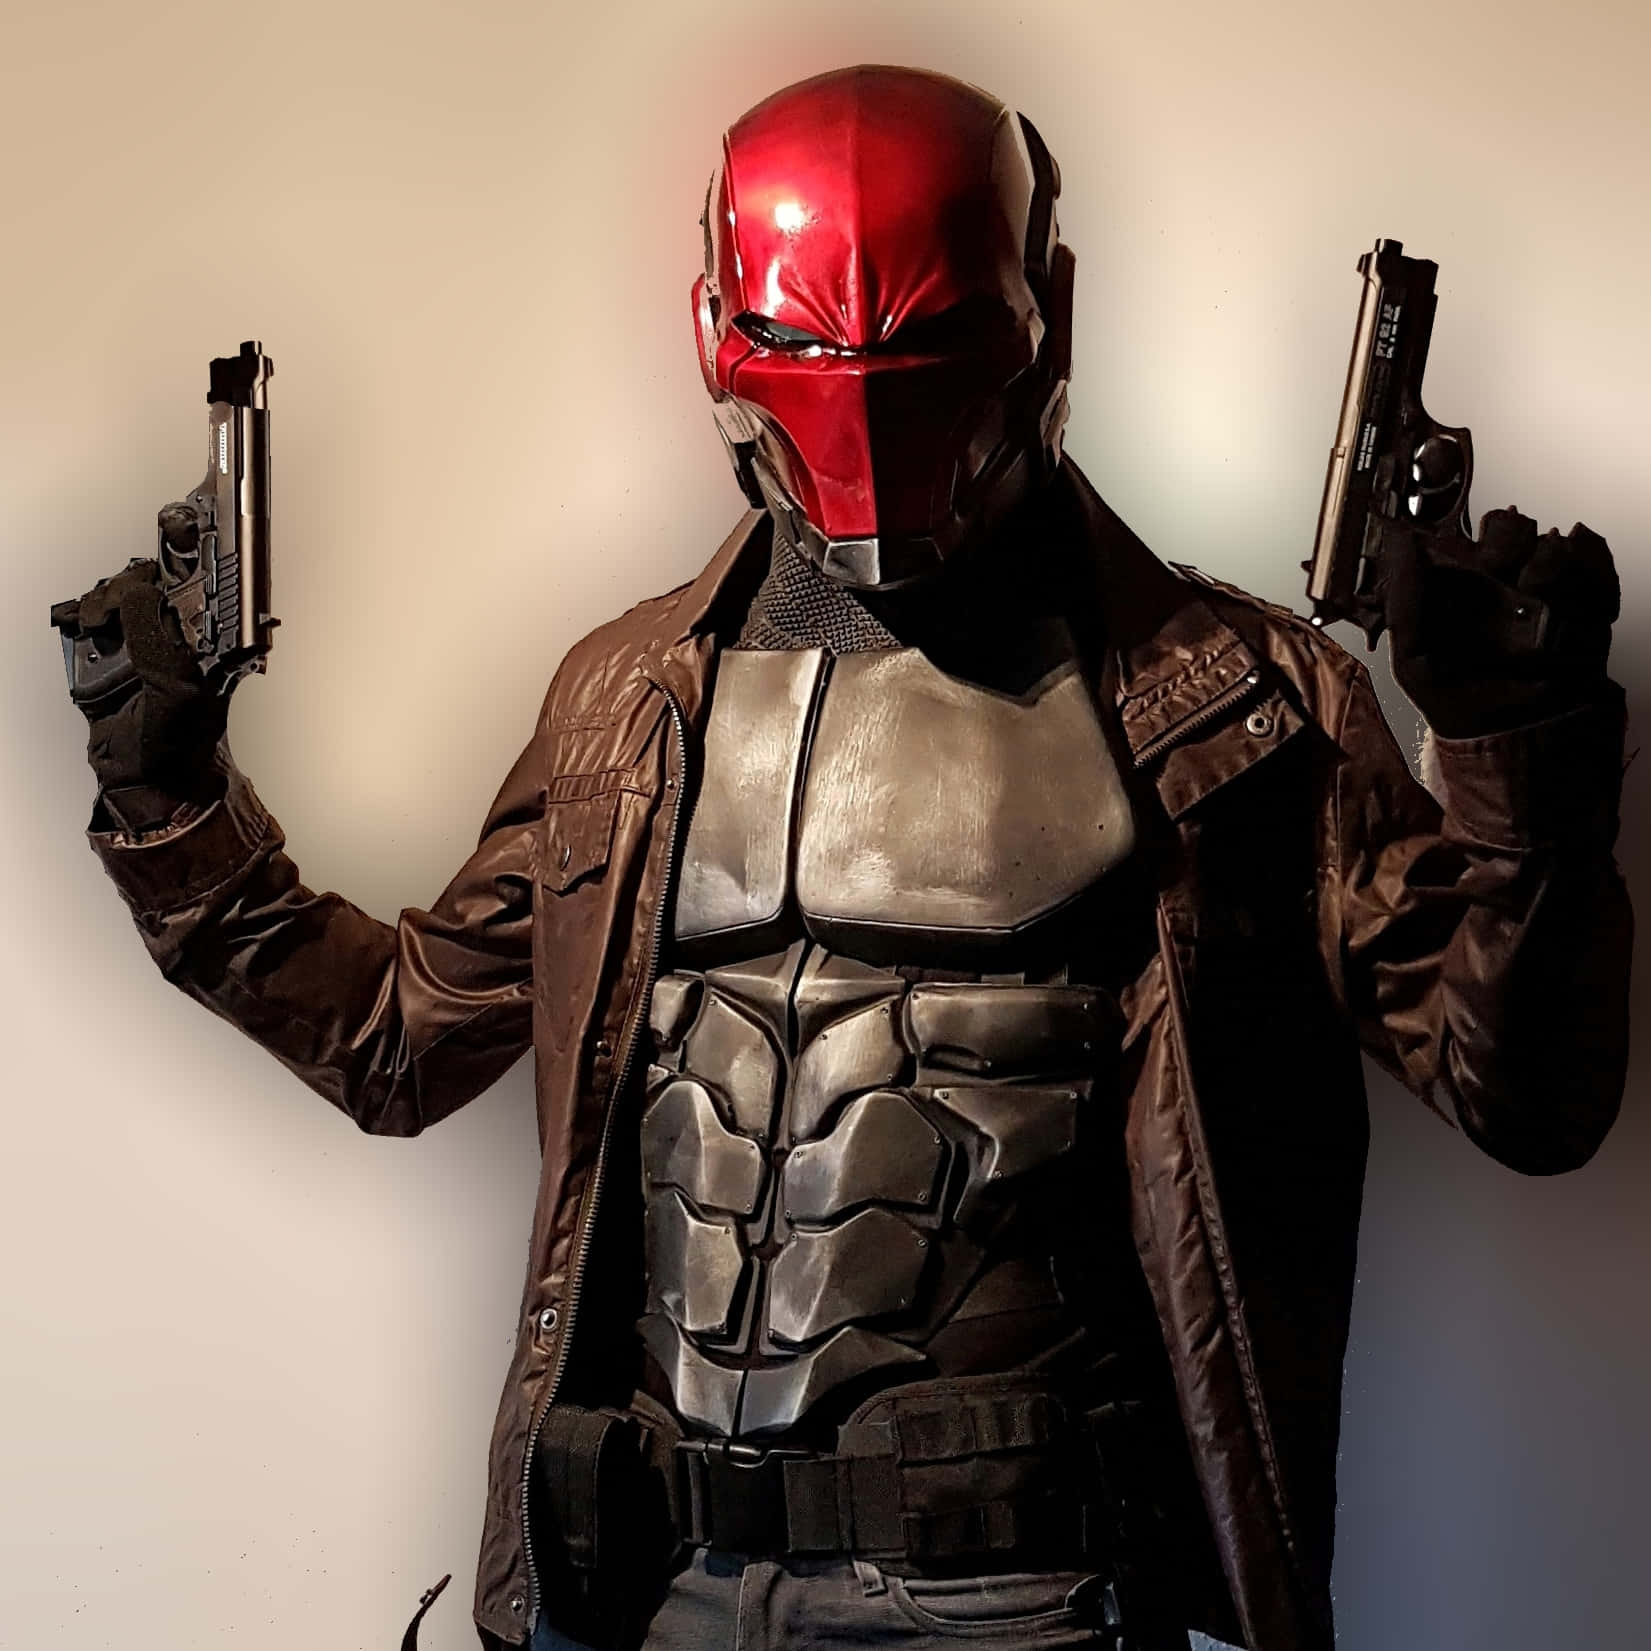 Red Hood looks confident and determined